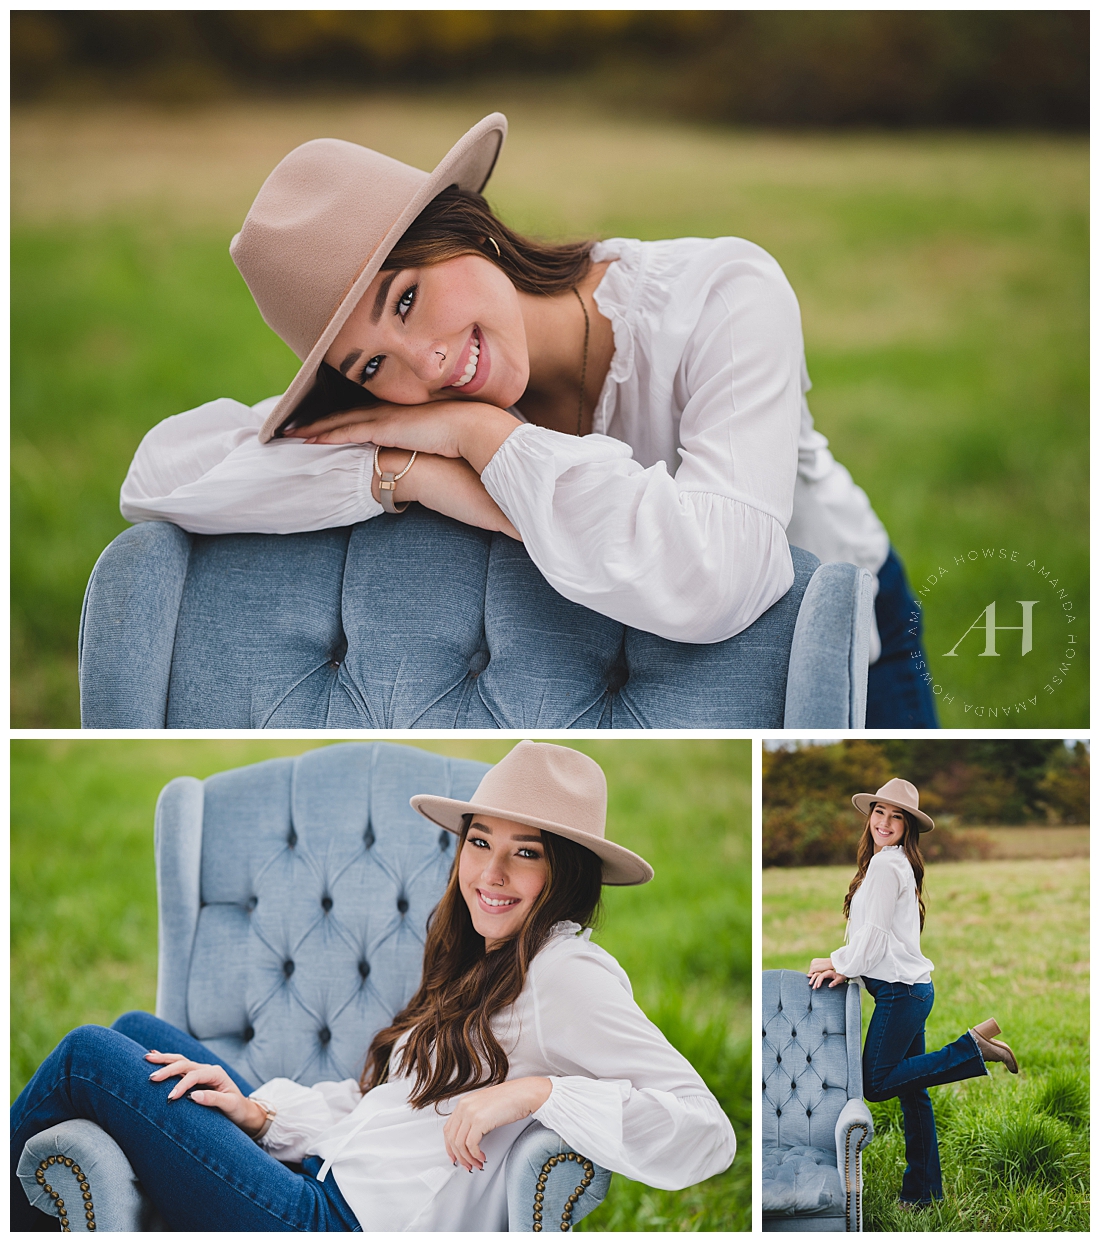 Rustic Senior Pictures in Green Field | Posing With Cute Blue Chair | Photographed by the Best Tacoma, Washington Senior Photographer Amanda Howse Photography